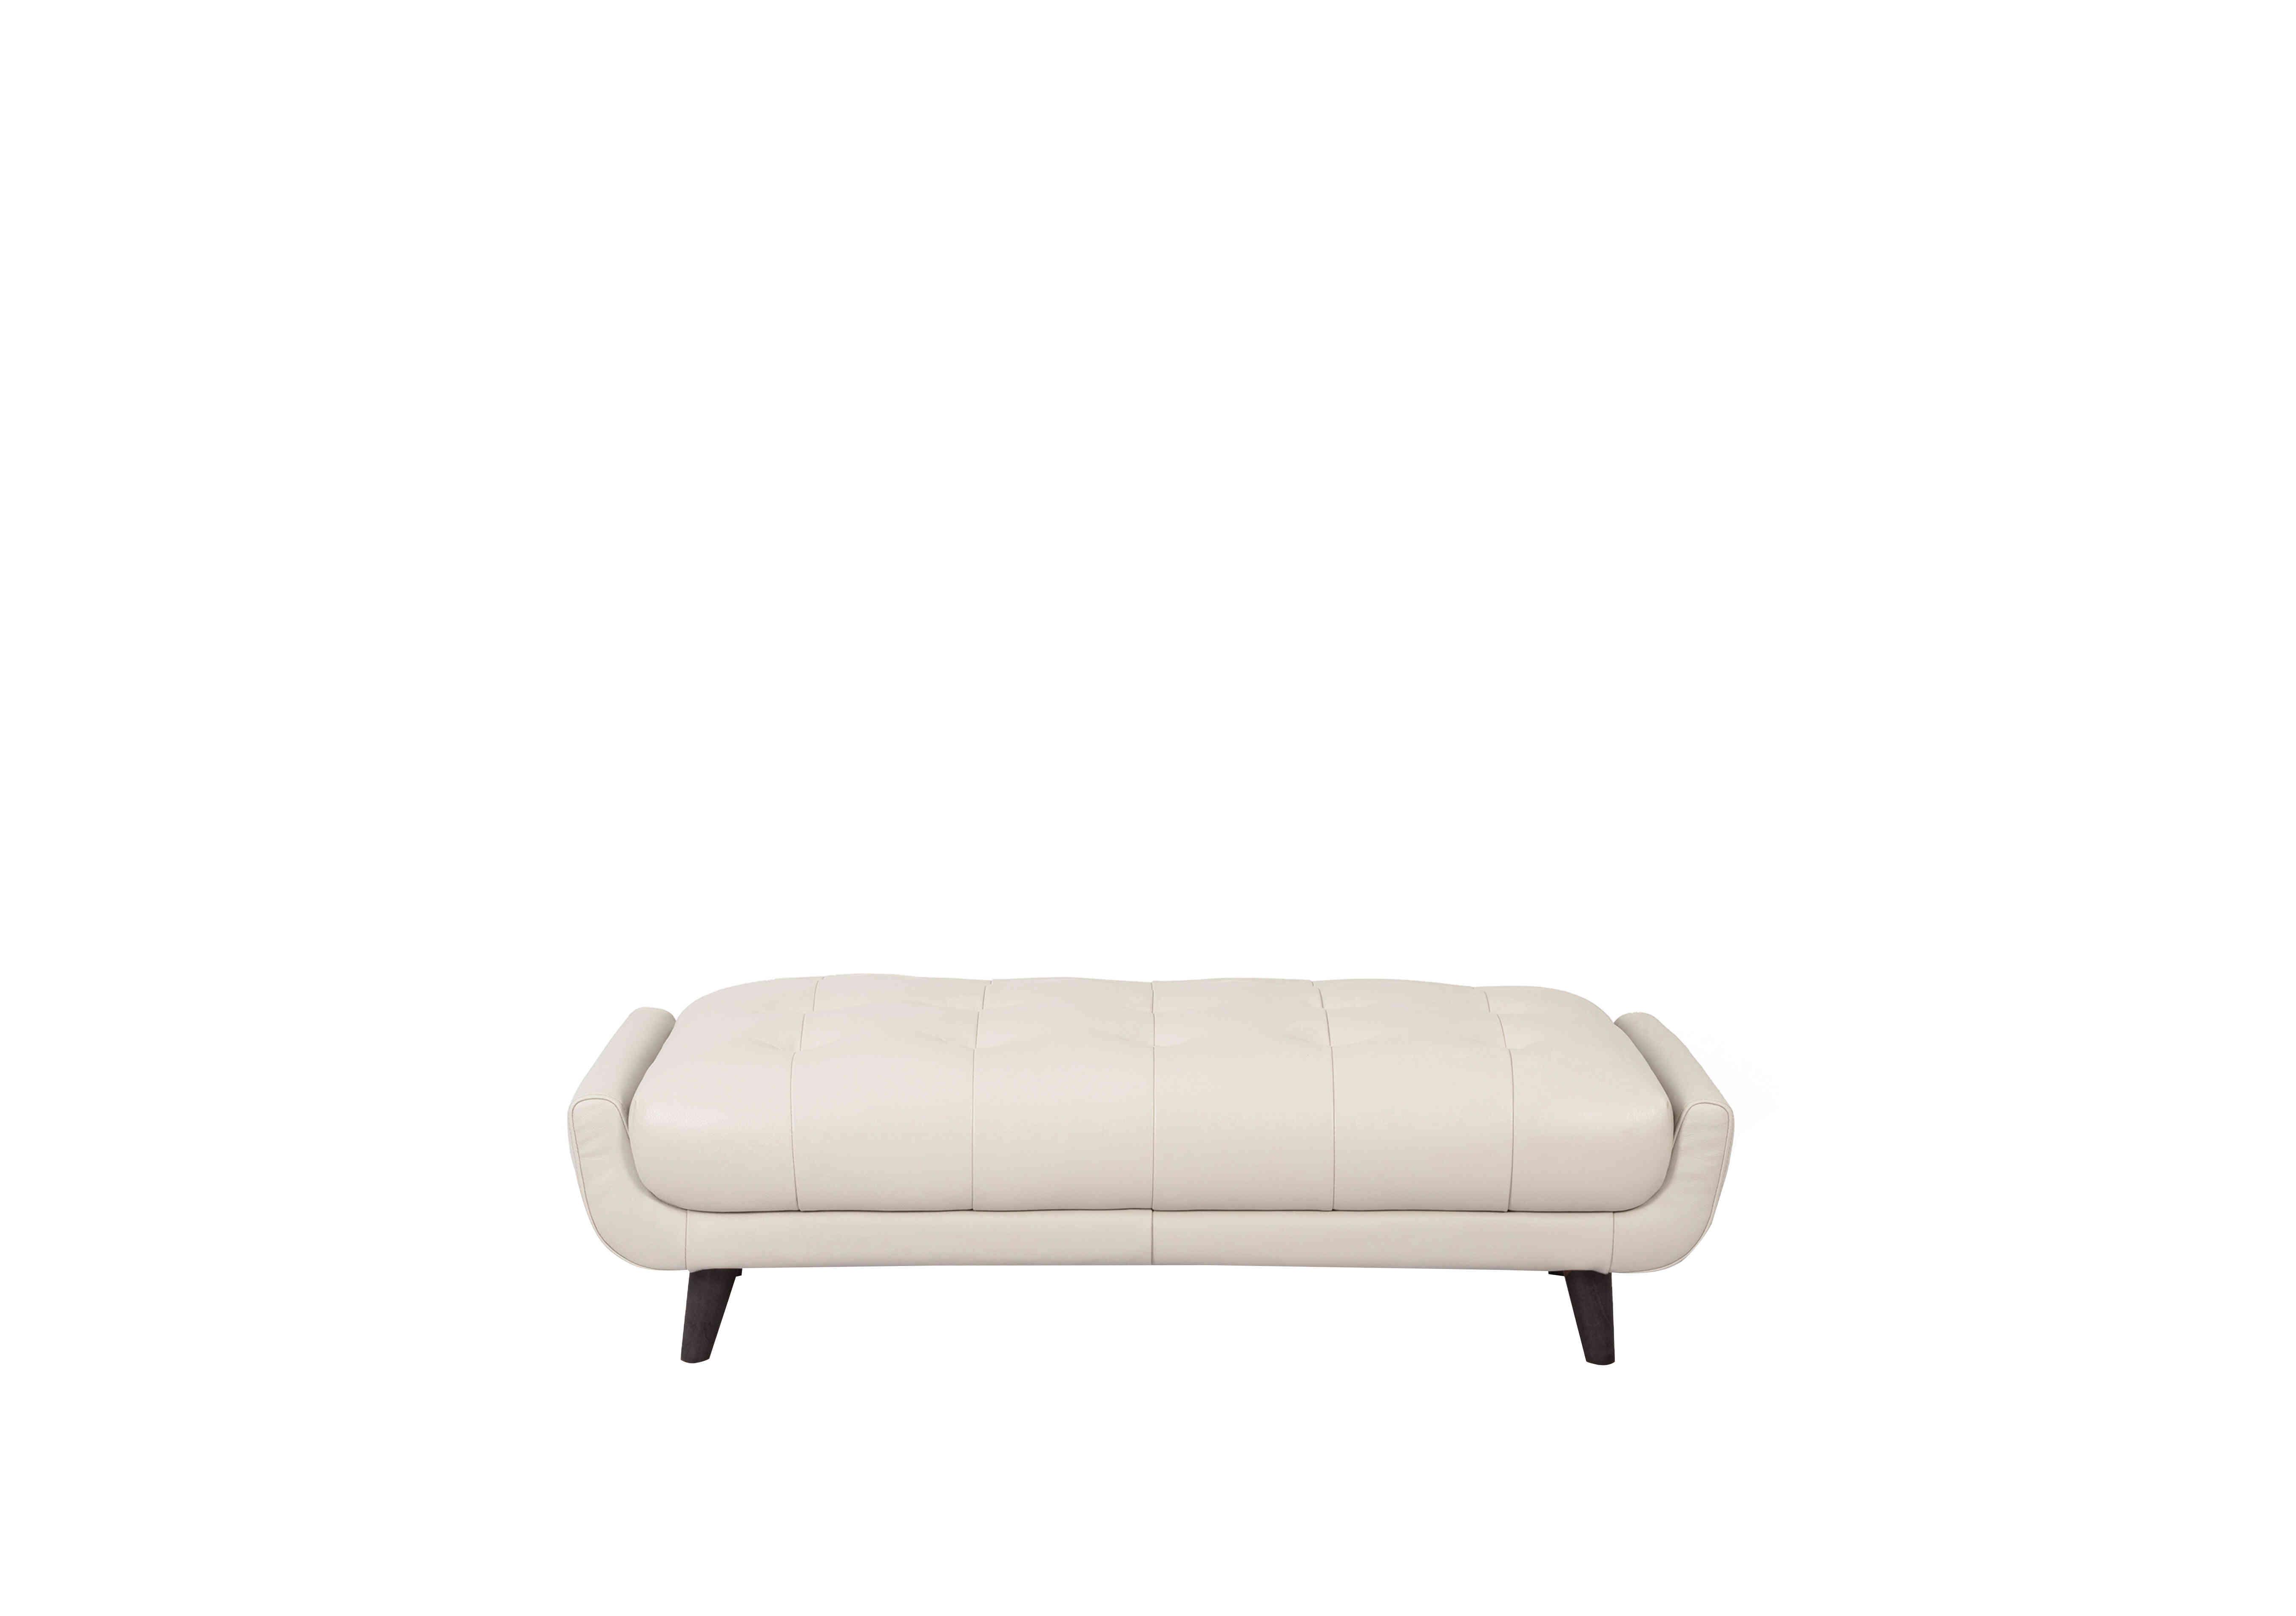 Rene Large Leather Footstool in Montana Cotton on Furniture Village